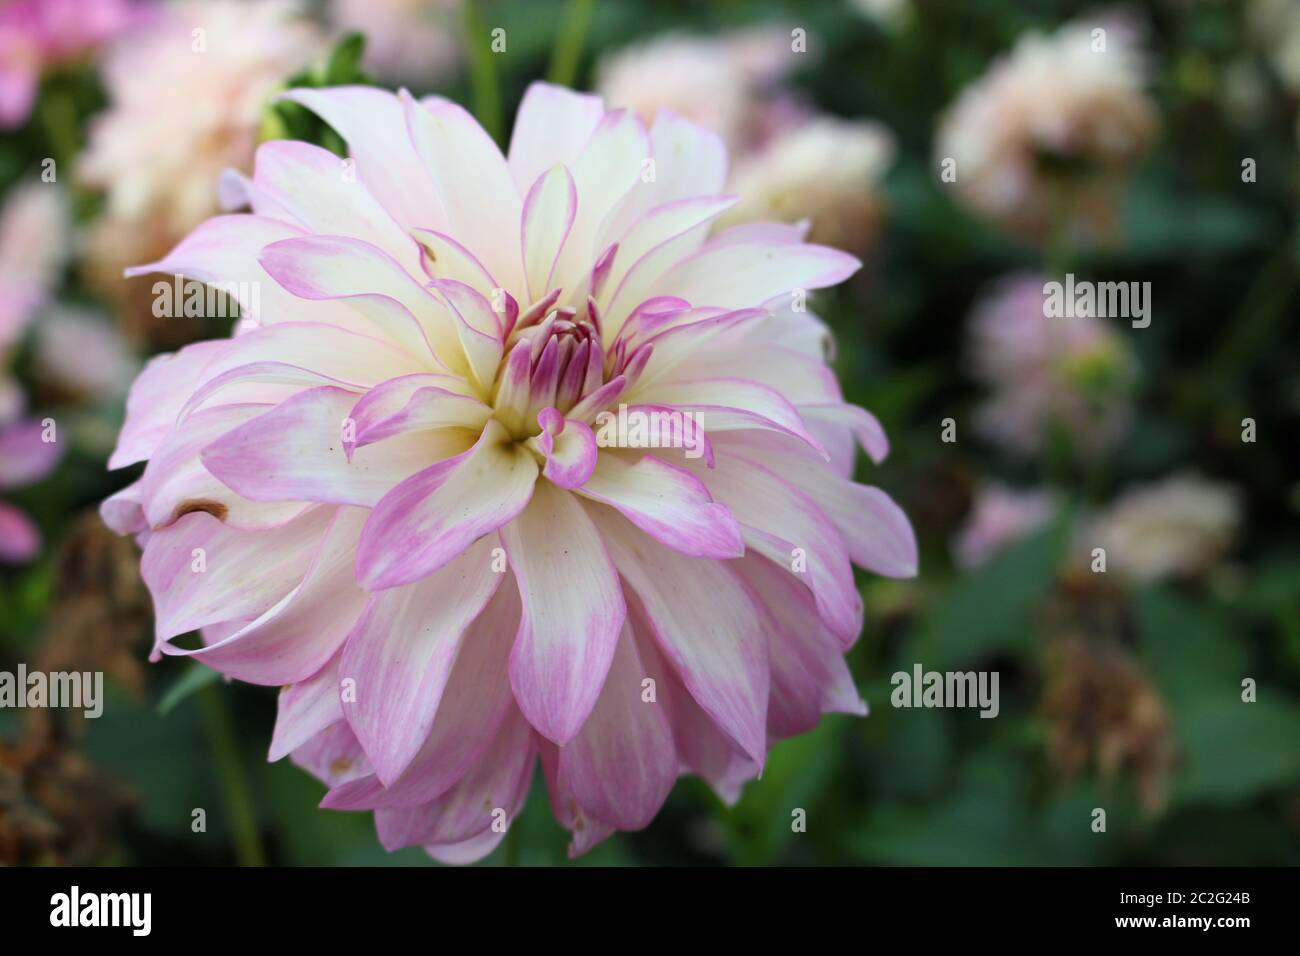 Pink and white dahlia variety Maiko Girl flower with a background of blurred leaves and flowers and good copy space. Stock Photo